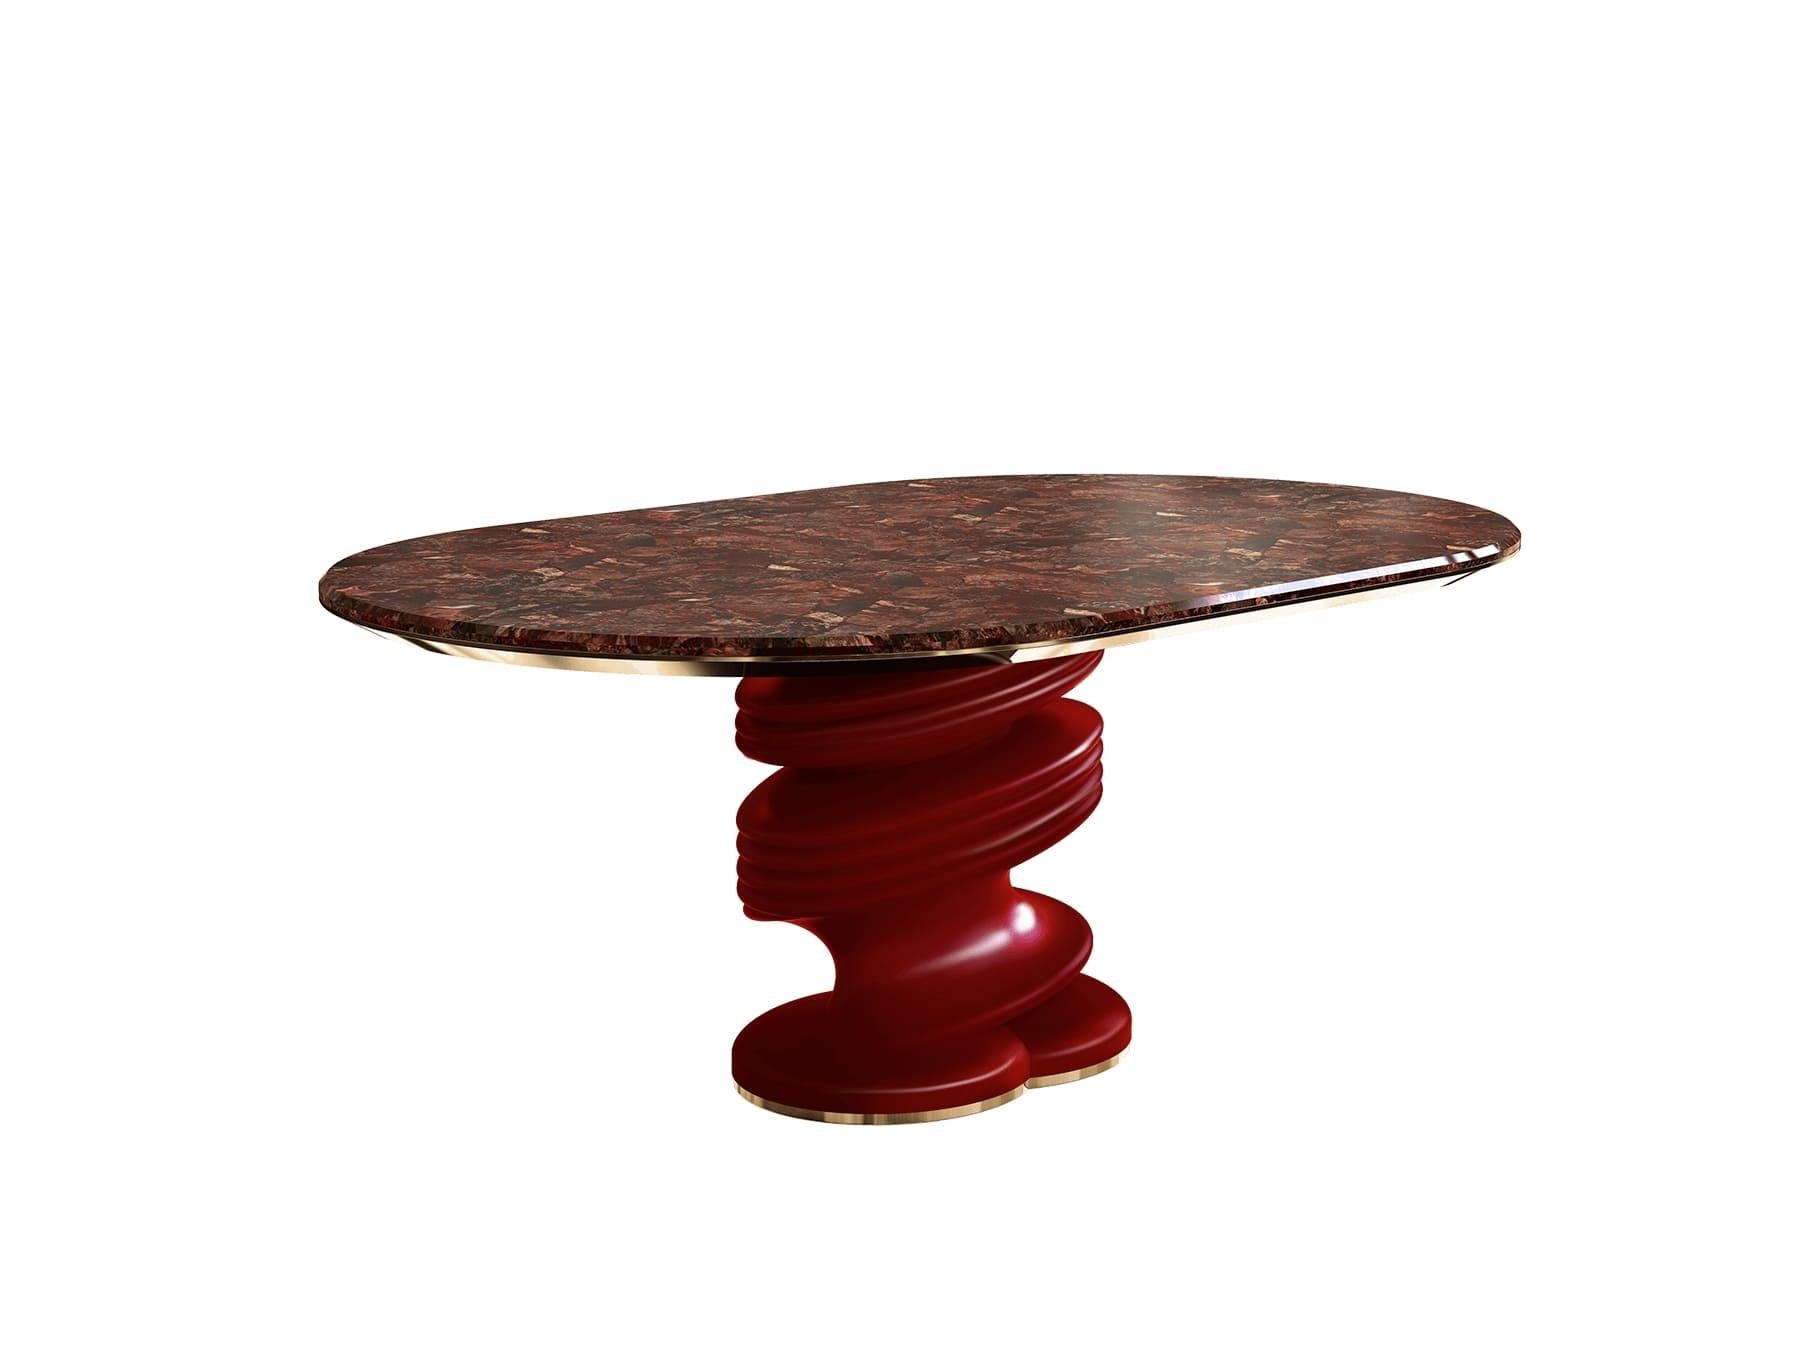 Portuguese Contemporary Red Levanto Marble Oval Dining Table With Base Lacquered in Red For Sale